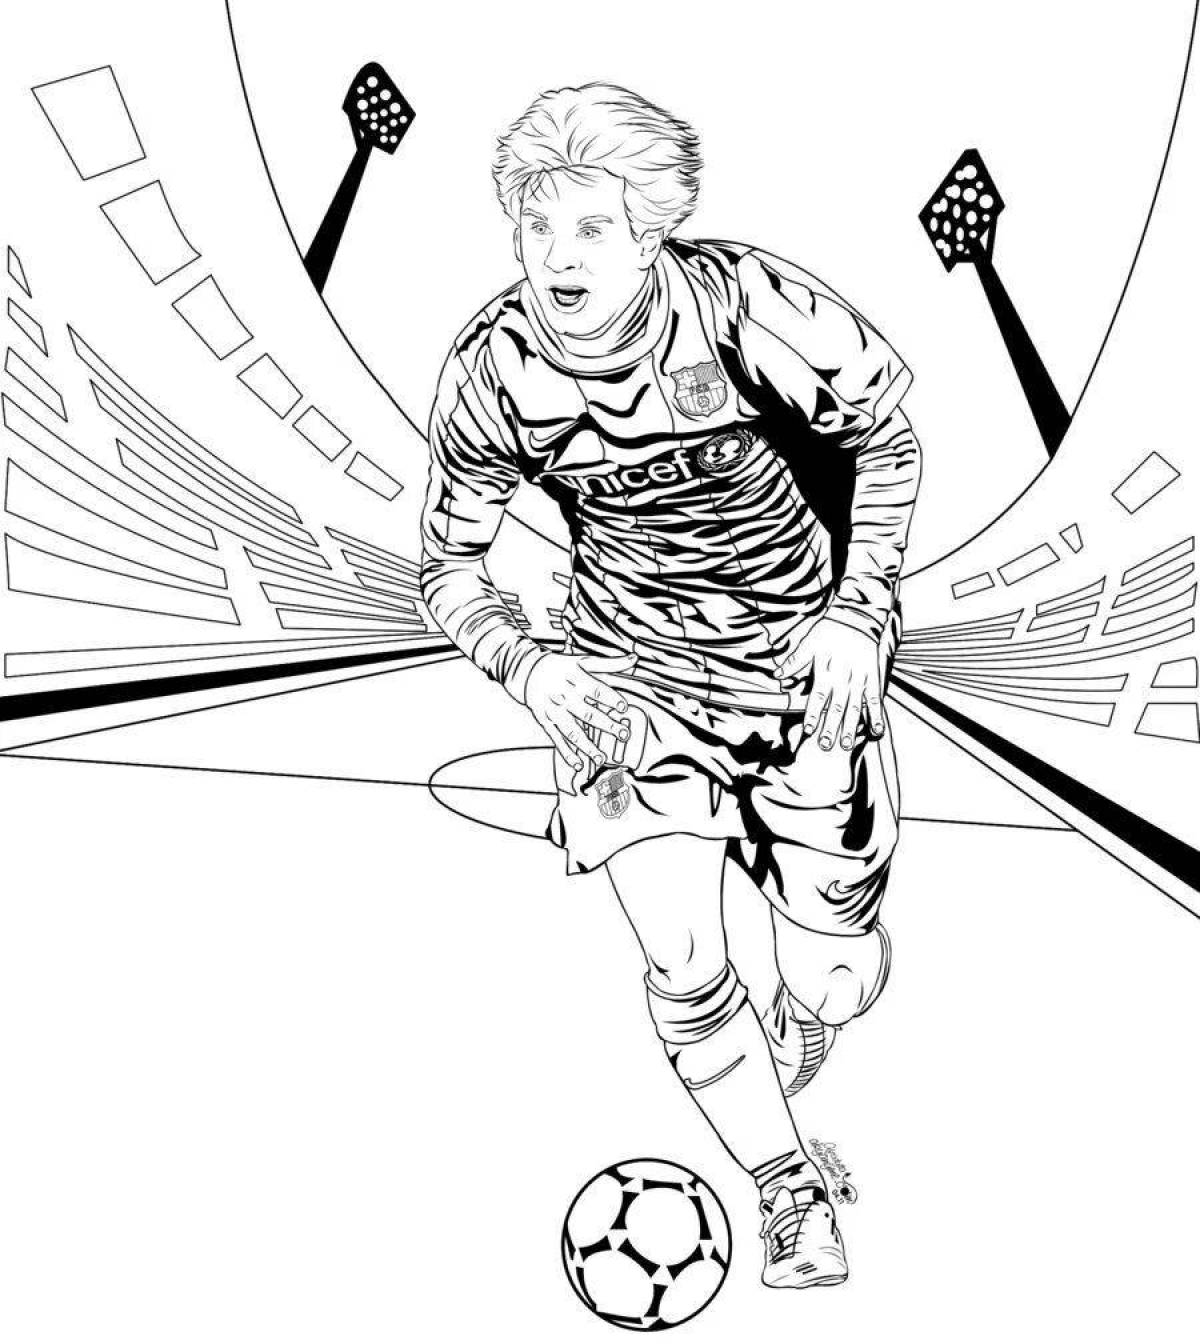 Coloring book gorgeous lionel messi